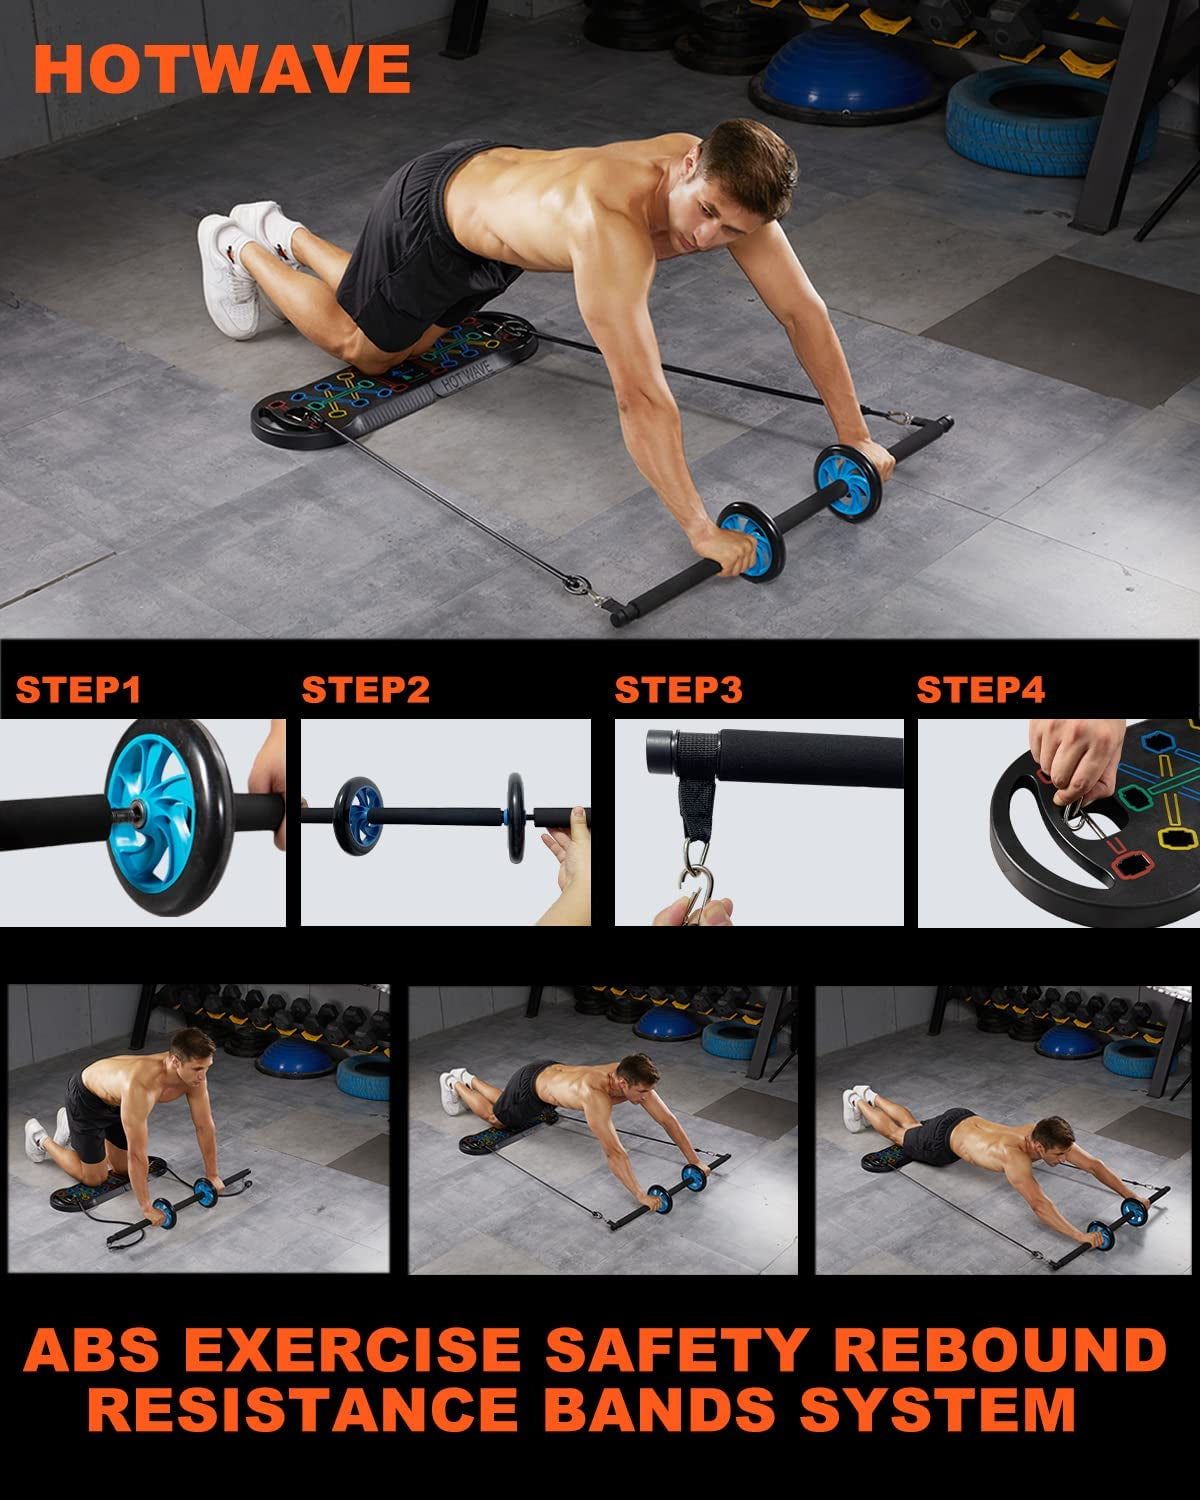 Portable Exercise Equipment with 16 Gym Accessories.20 in 1 Push up Board Fitness,Resistance Bands with Ab Roller Wheel,Full Body Workout at Home,Patent Pending